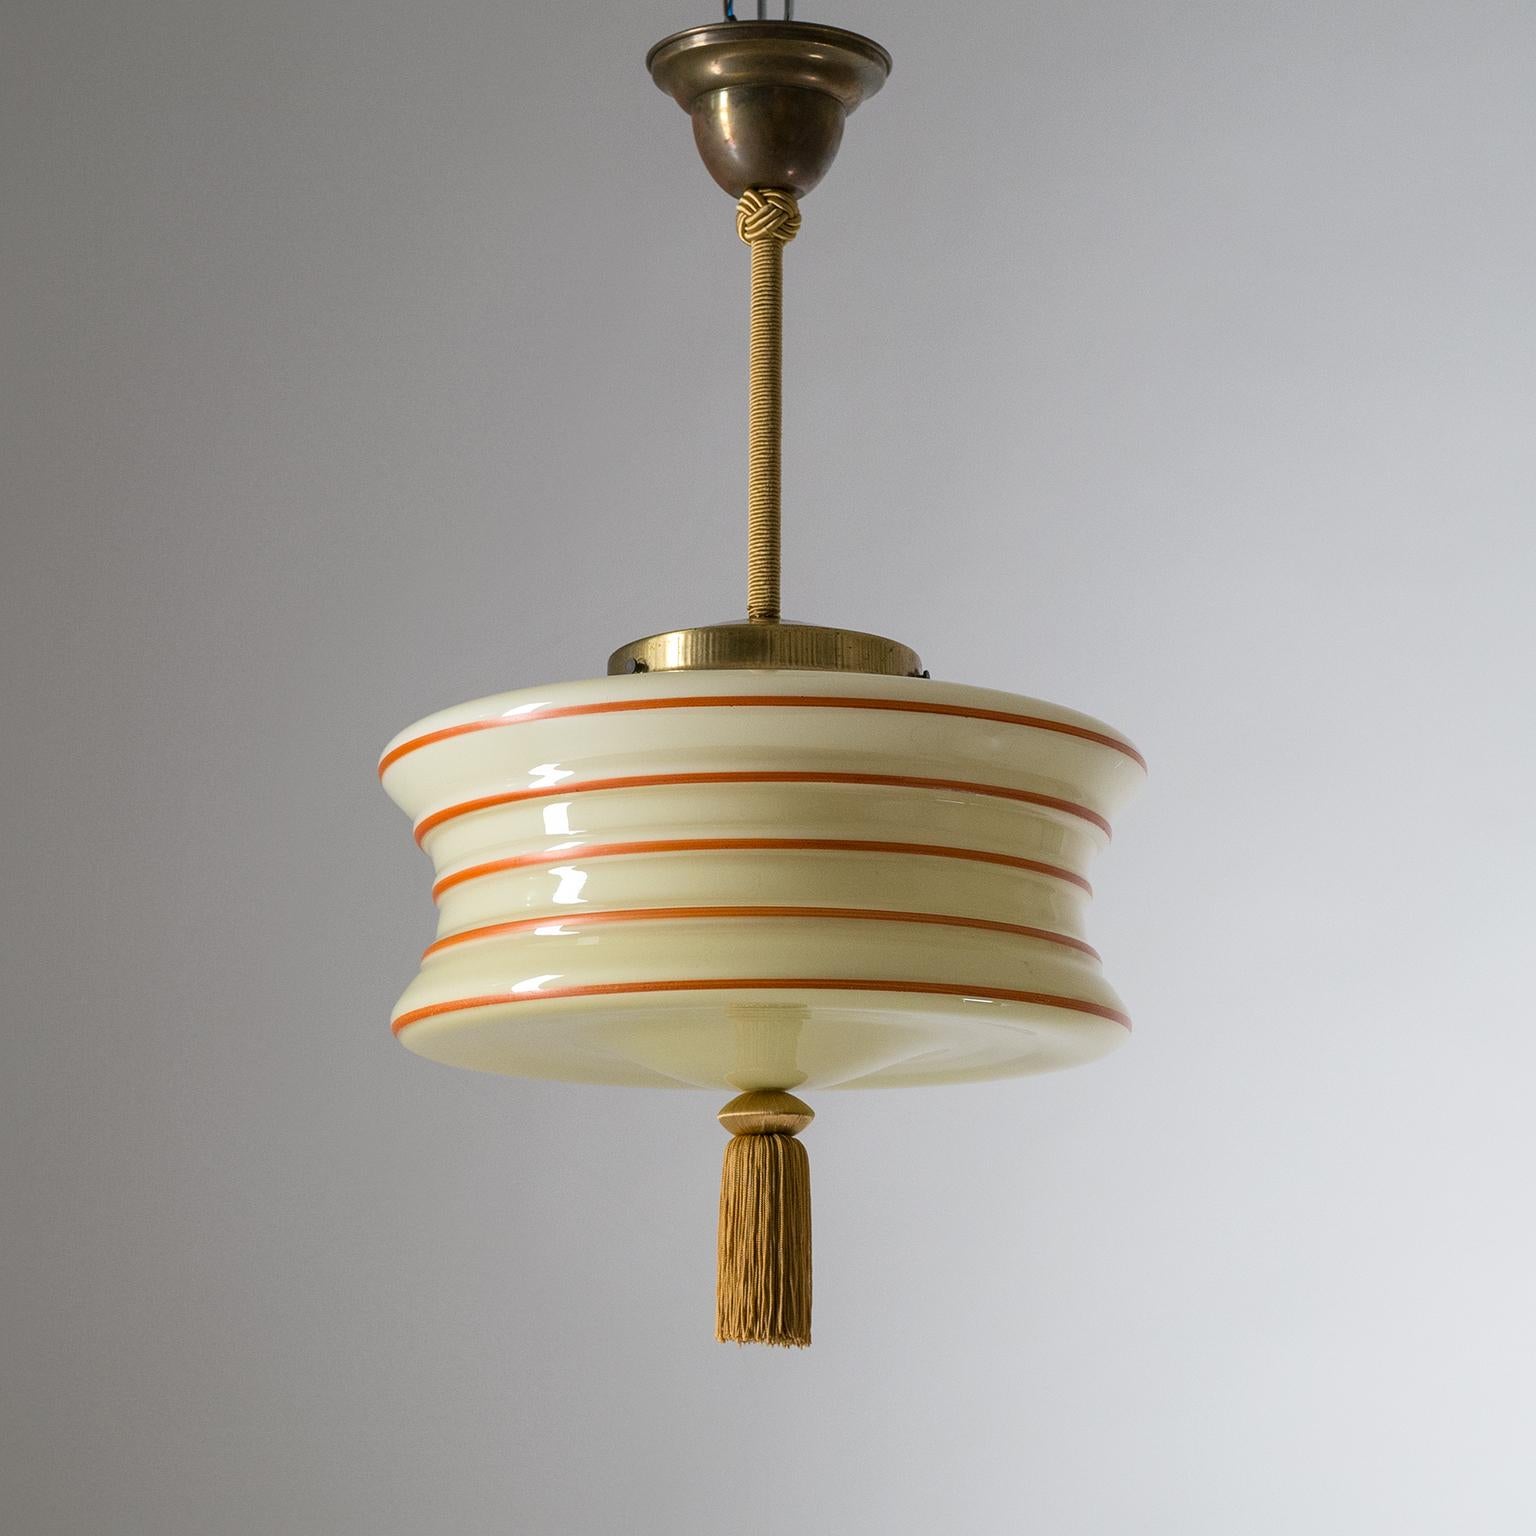 Enameled glass pendant from the 1930s. The uniquely shaped glass diffuser is made of Ivory tinted glass with a white inner casing and red hand-painted lines, emphasizing the structured silhouette. Brass hardware with covered stem and a tassel at the